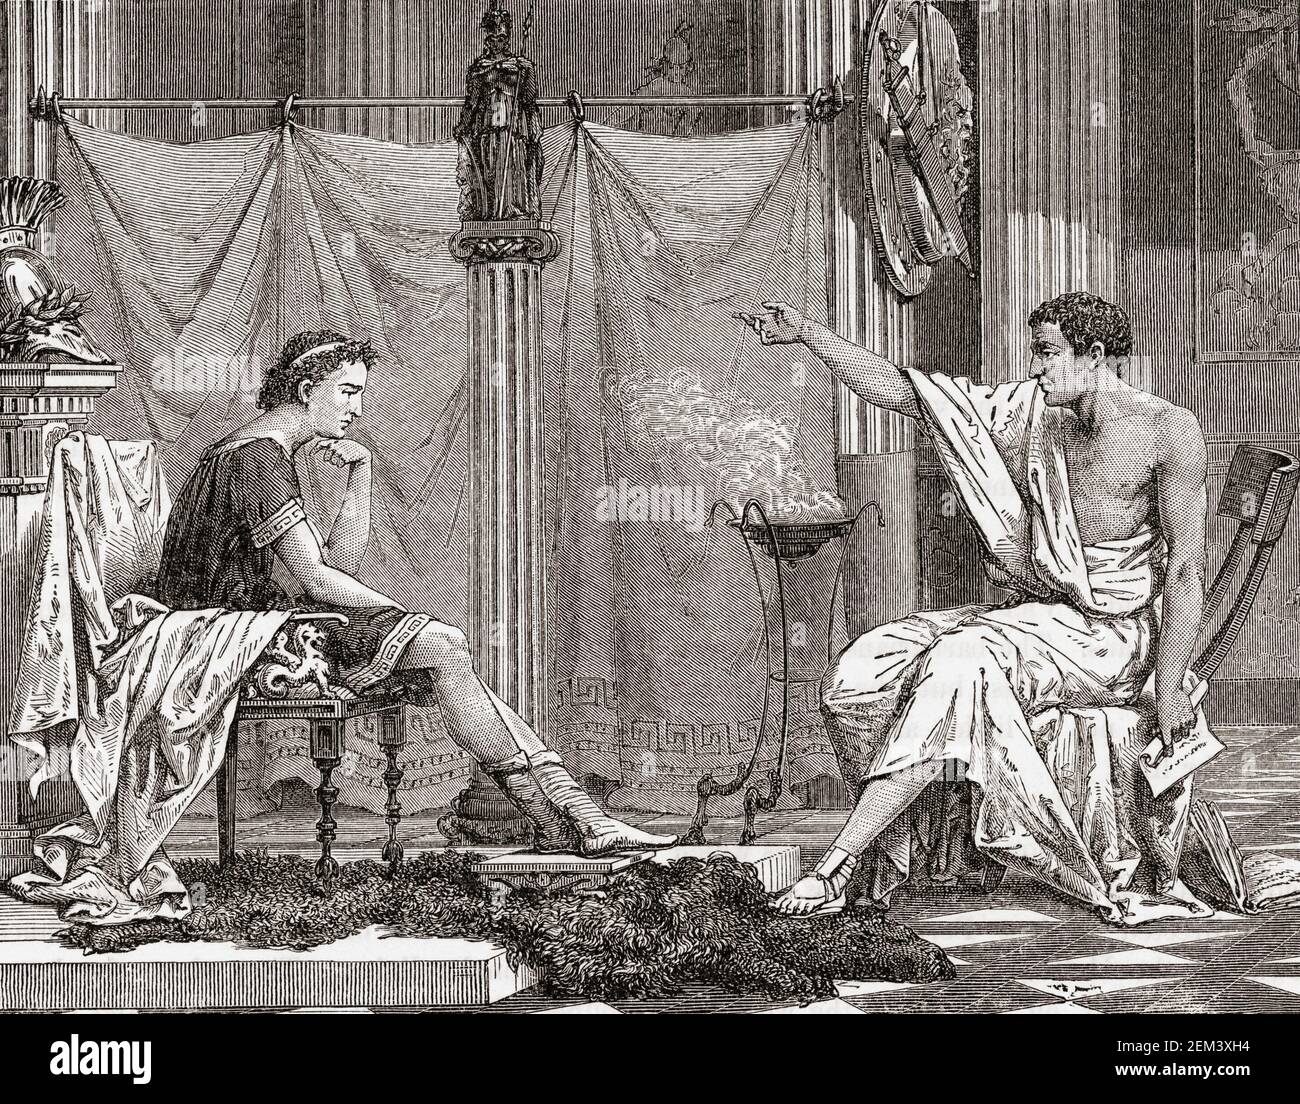 Aristotle tutoring the young Alexander the Great.  Alexander's father, Philip II, King of Macedon, hired the respected Greek philosopher to educate his son.  Alexander III of Macedon, known as Alexander the Great, 356 BC - 323 BC.   Aristotle, 384 BC - 322 BC.   After a 19th century wood engraving. Stock Photo